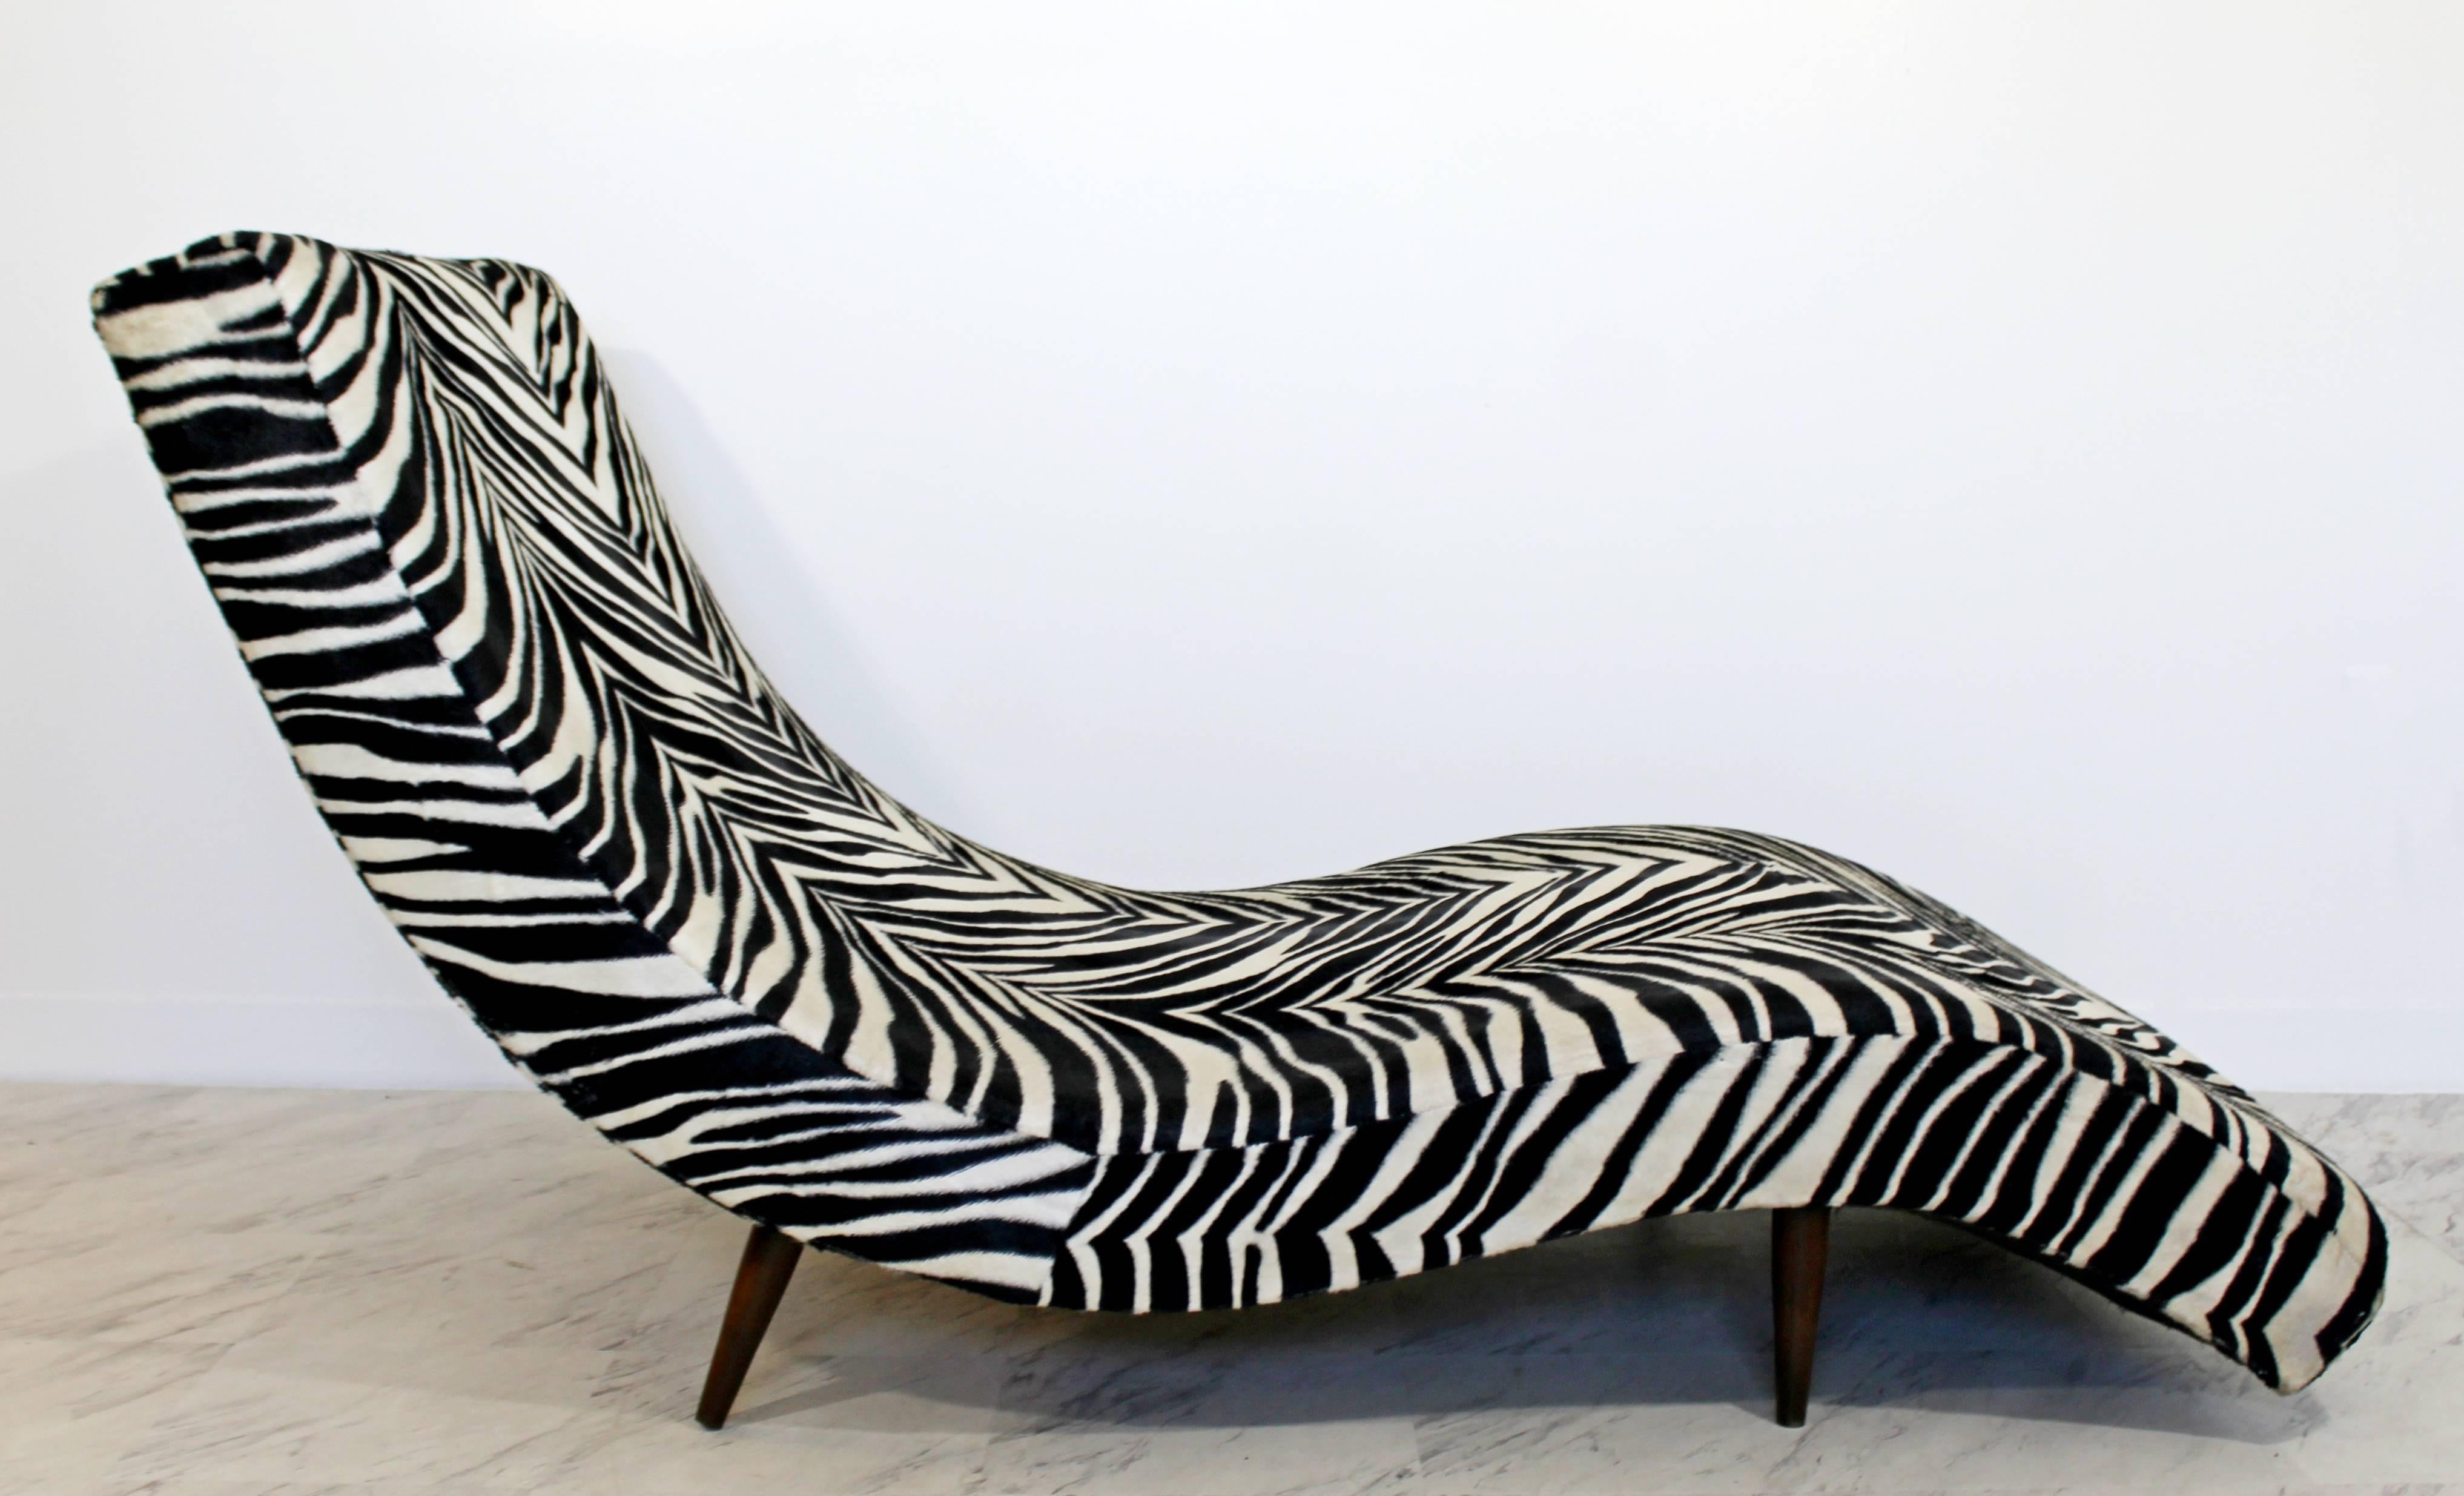 For your consideration is an incredible, zebra print, S or wave form chaise lounge, by Adrian Pearsall for Craft Associates, circa the 1960s. In excellent condition. The dimensions are 36